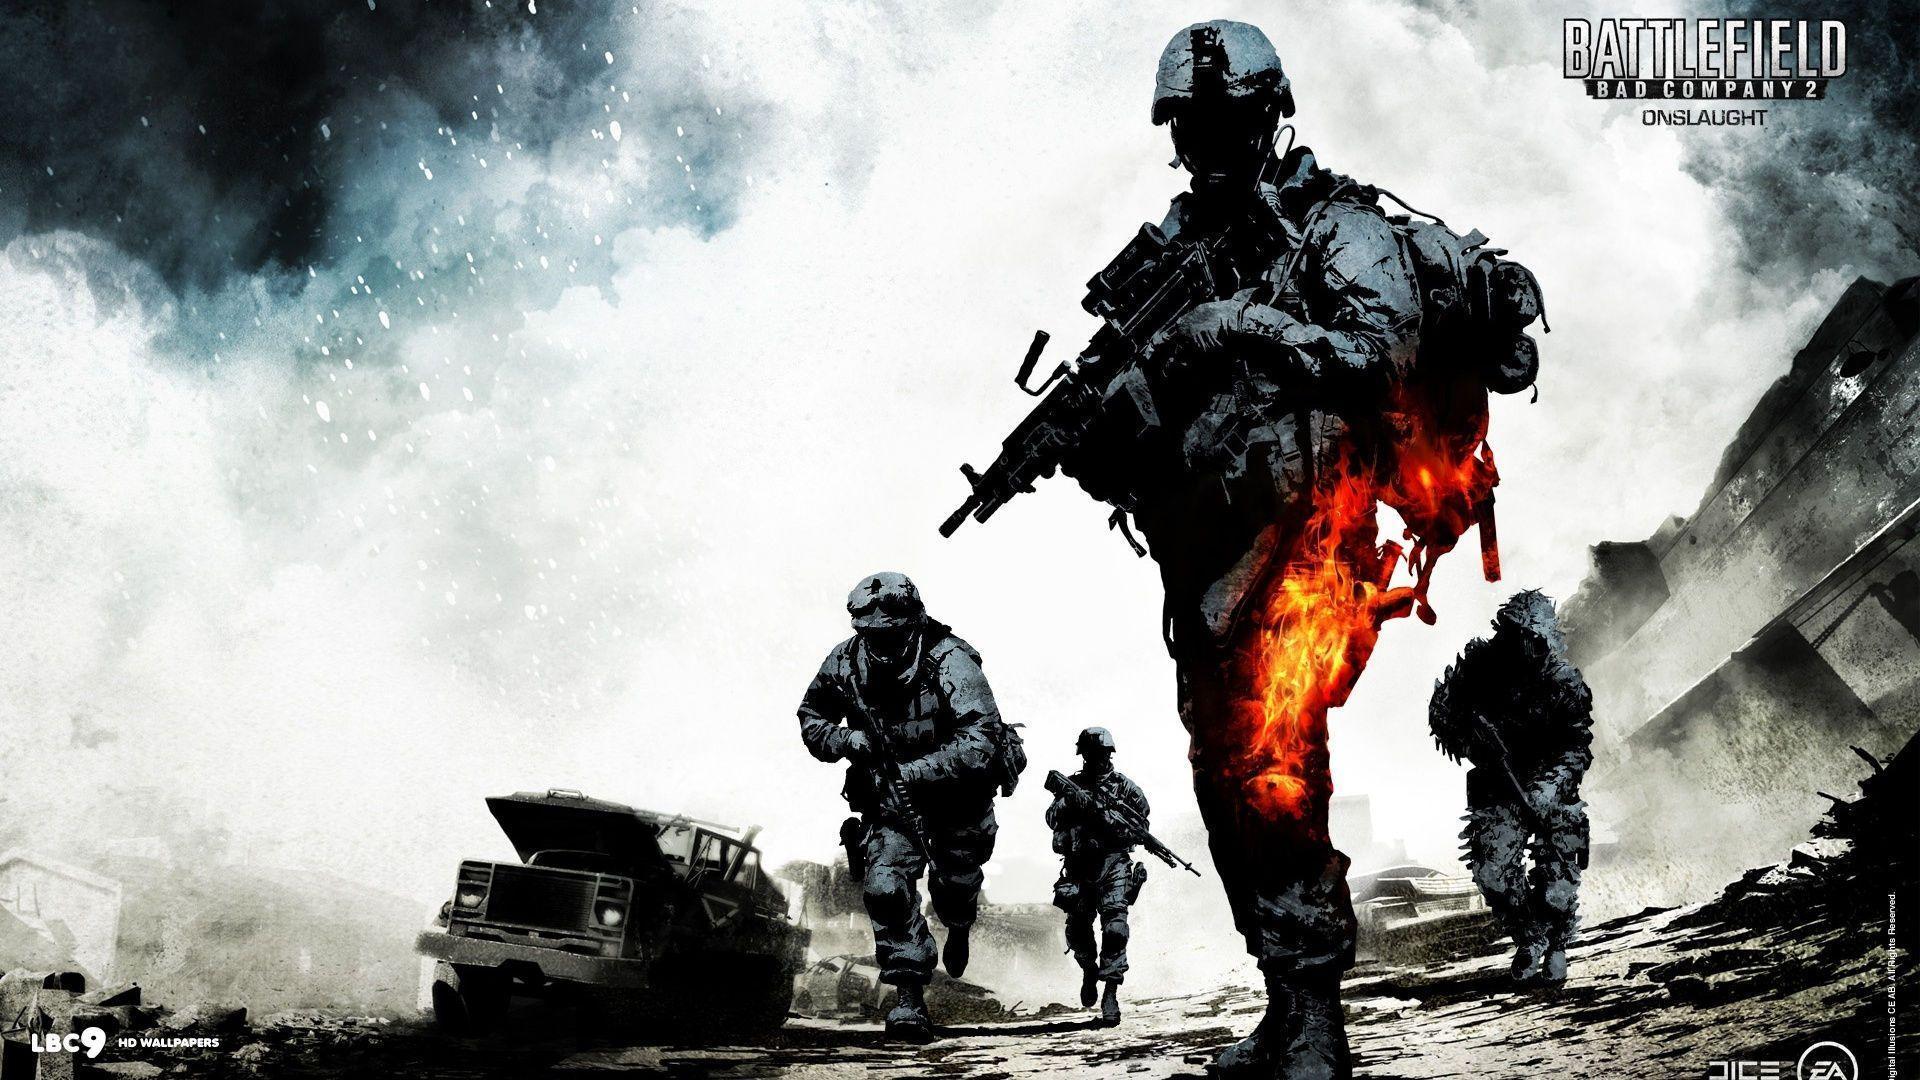 Battlefield Bad Company 2 Wallpaper 7 8. First Person Shooter